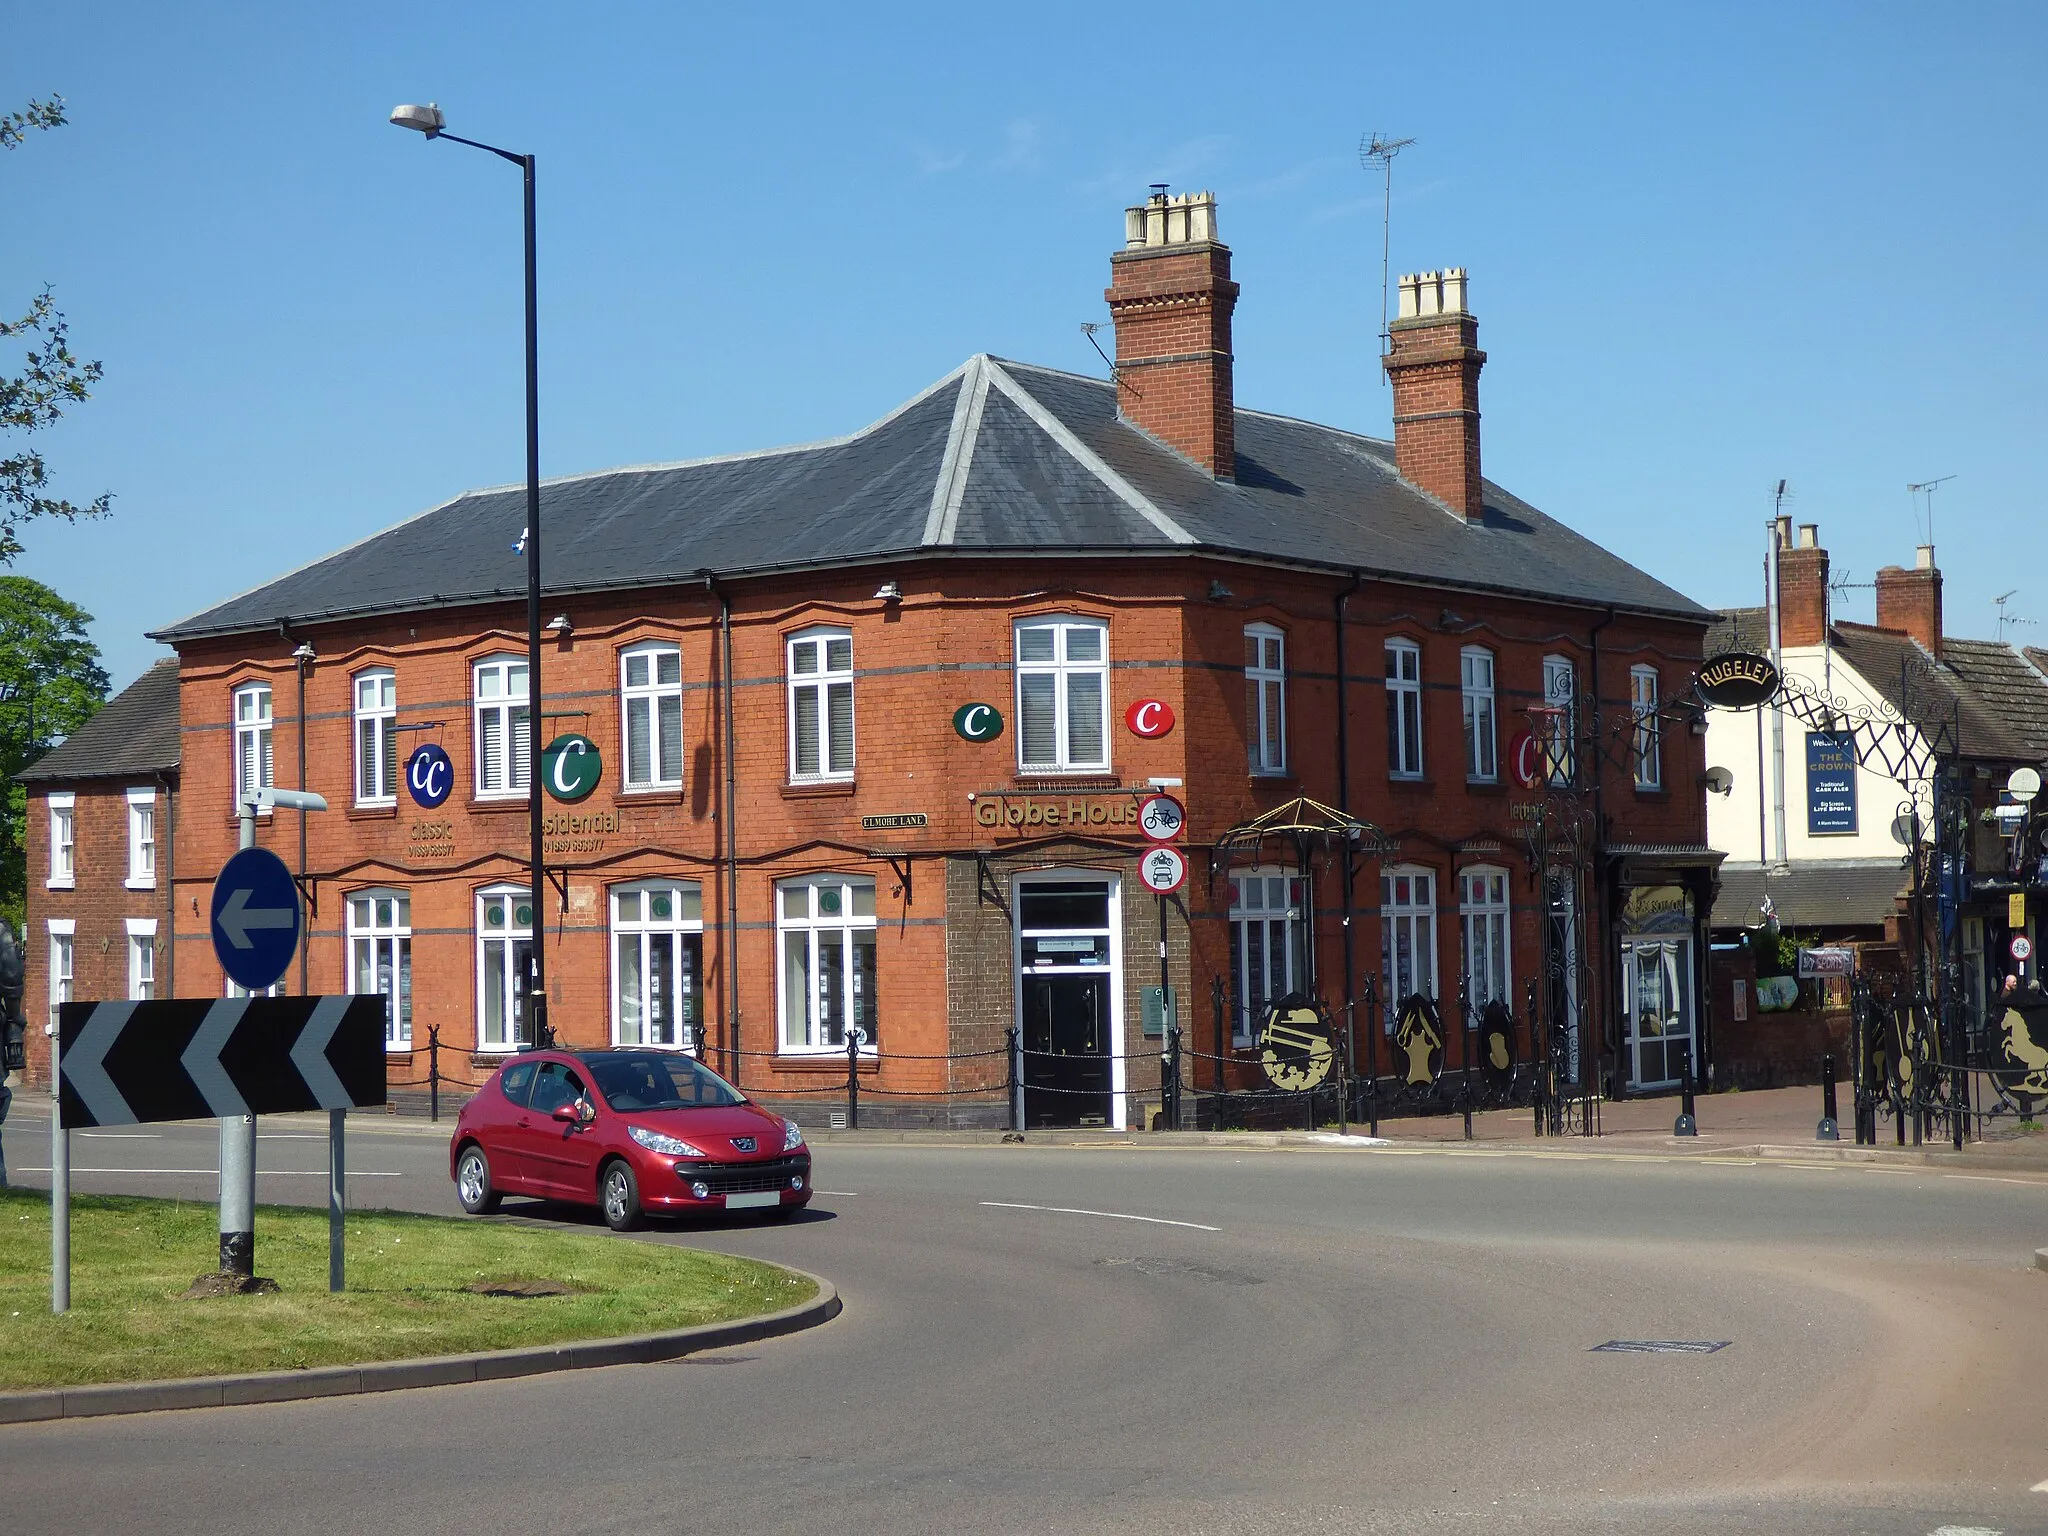 Photo showing: At Globe Island in Rugeley.
The location of the 2015 Miners Memorial sculptures.
The island is at the junctions of Upper Brook Street (pedestrianised), Horse Fair, Sandy Lane, Western Springs Road and Elmore Lane.

Globe House at the corner of Elmore Lane and Upper Brook Street. Estate agents.
Near The Crown pub.
Commemorative Railings

A series of railing posts have been fabricated to resemble nails. Along the main road, these are joined by 'ropes' of wrought iron. Four individual bunches of nails are not part of the railings, and are about half their height. Chains and buckles in wrought iron attach the remaining railing posts to eight egg-shaped medallions suspended midway between each of them. Each of the medallions is decorated with symbols of a different local industry, thereby celebrating Rugeley's heritage. On the left, inwards from the roundabout, they depect mining (pit head wheel, pick, shovel and coal), metal working (knife, forceps and breastplate), and hat-making (a top hat). On the right, they depict a startled horse on its hind legs, glass-making (flasks, vases and a retort), engineering (cog wheel with spikes and a machine tool of some kind), blacksmithing (an anvil, hammer and tongs), and possibly clothing (though the military jacket could alternatively refer to the many army camps in the area). The medallions have the same design on both sides. The designs are almost flat, and are bolted onto the black blackground in each case. The railings with the medallions lead up to a wrought iron archway at the entrance to the pedestrianised area, which has the word RUGELEY in gold in a circular medallion at its apex. There are three horseshoes in a vertical line on each side of the archway. The choice of colour scheme and materials are identical to those for the benches recently installed in Elmore Park nearby, and inscribed with the date '1999'.